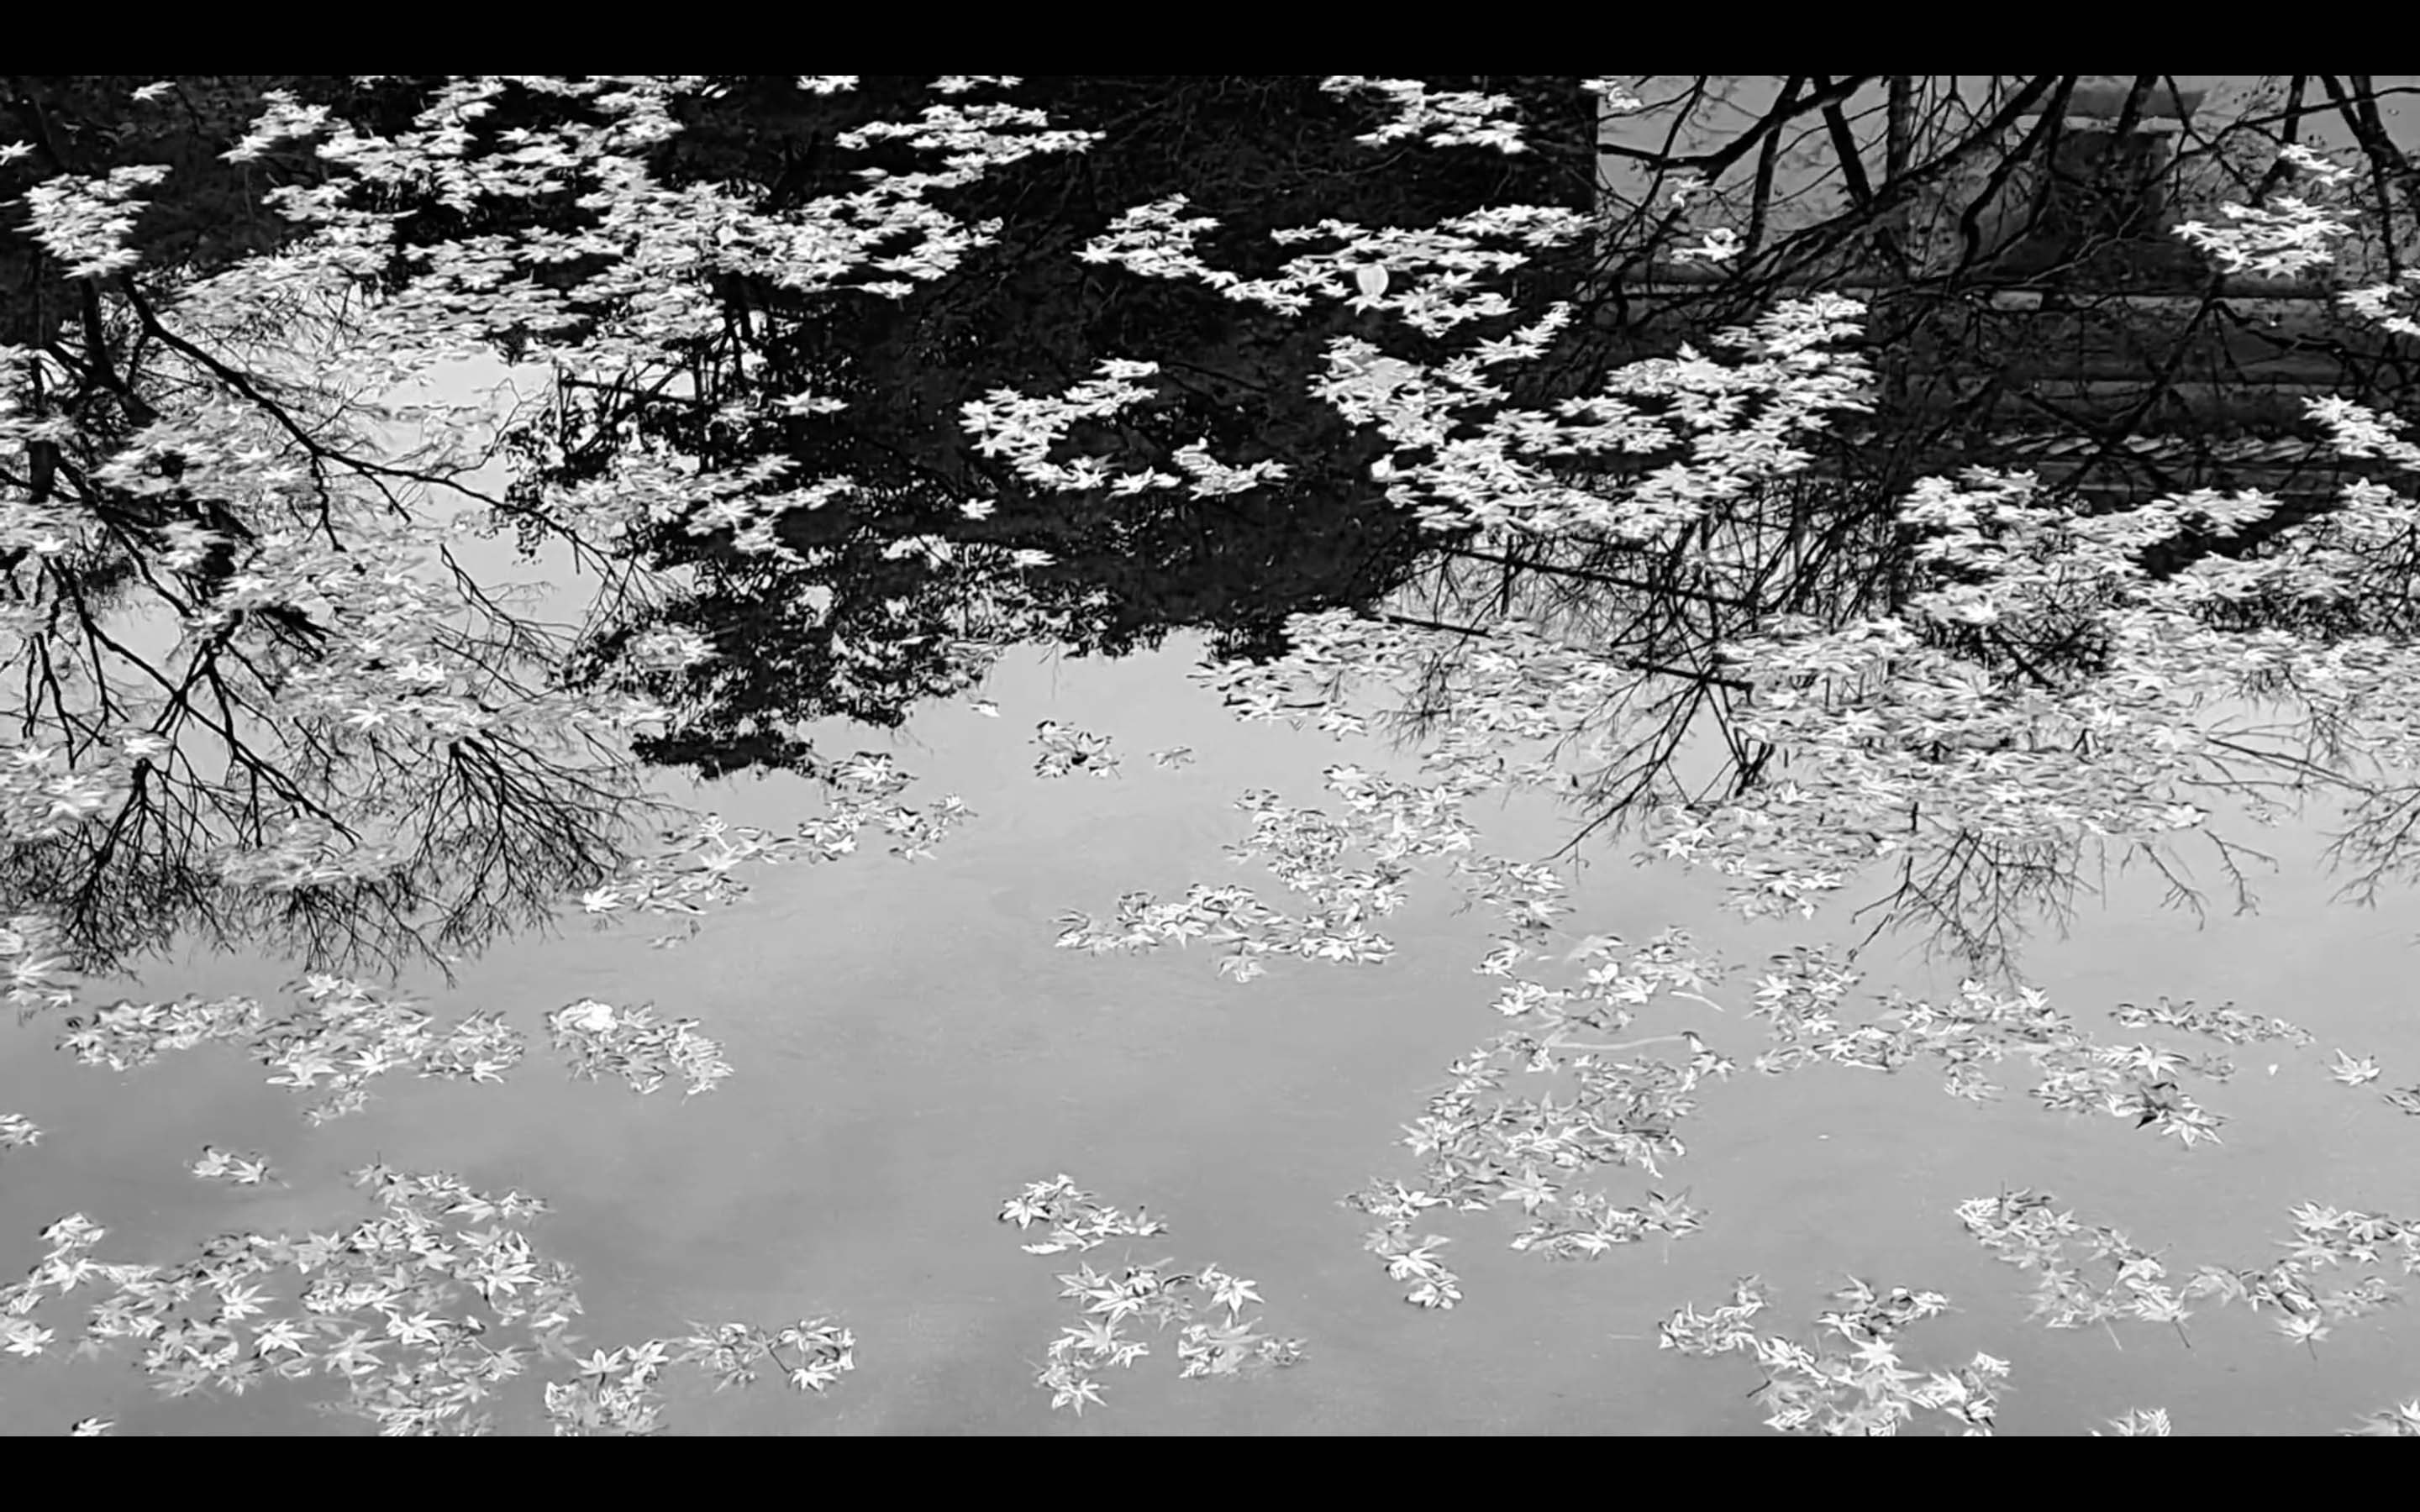 A still taken from a black and white film showing bare branches and leaves floating on a silver surface.